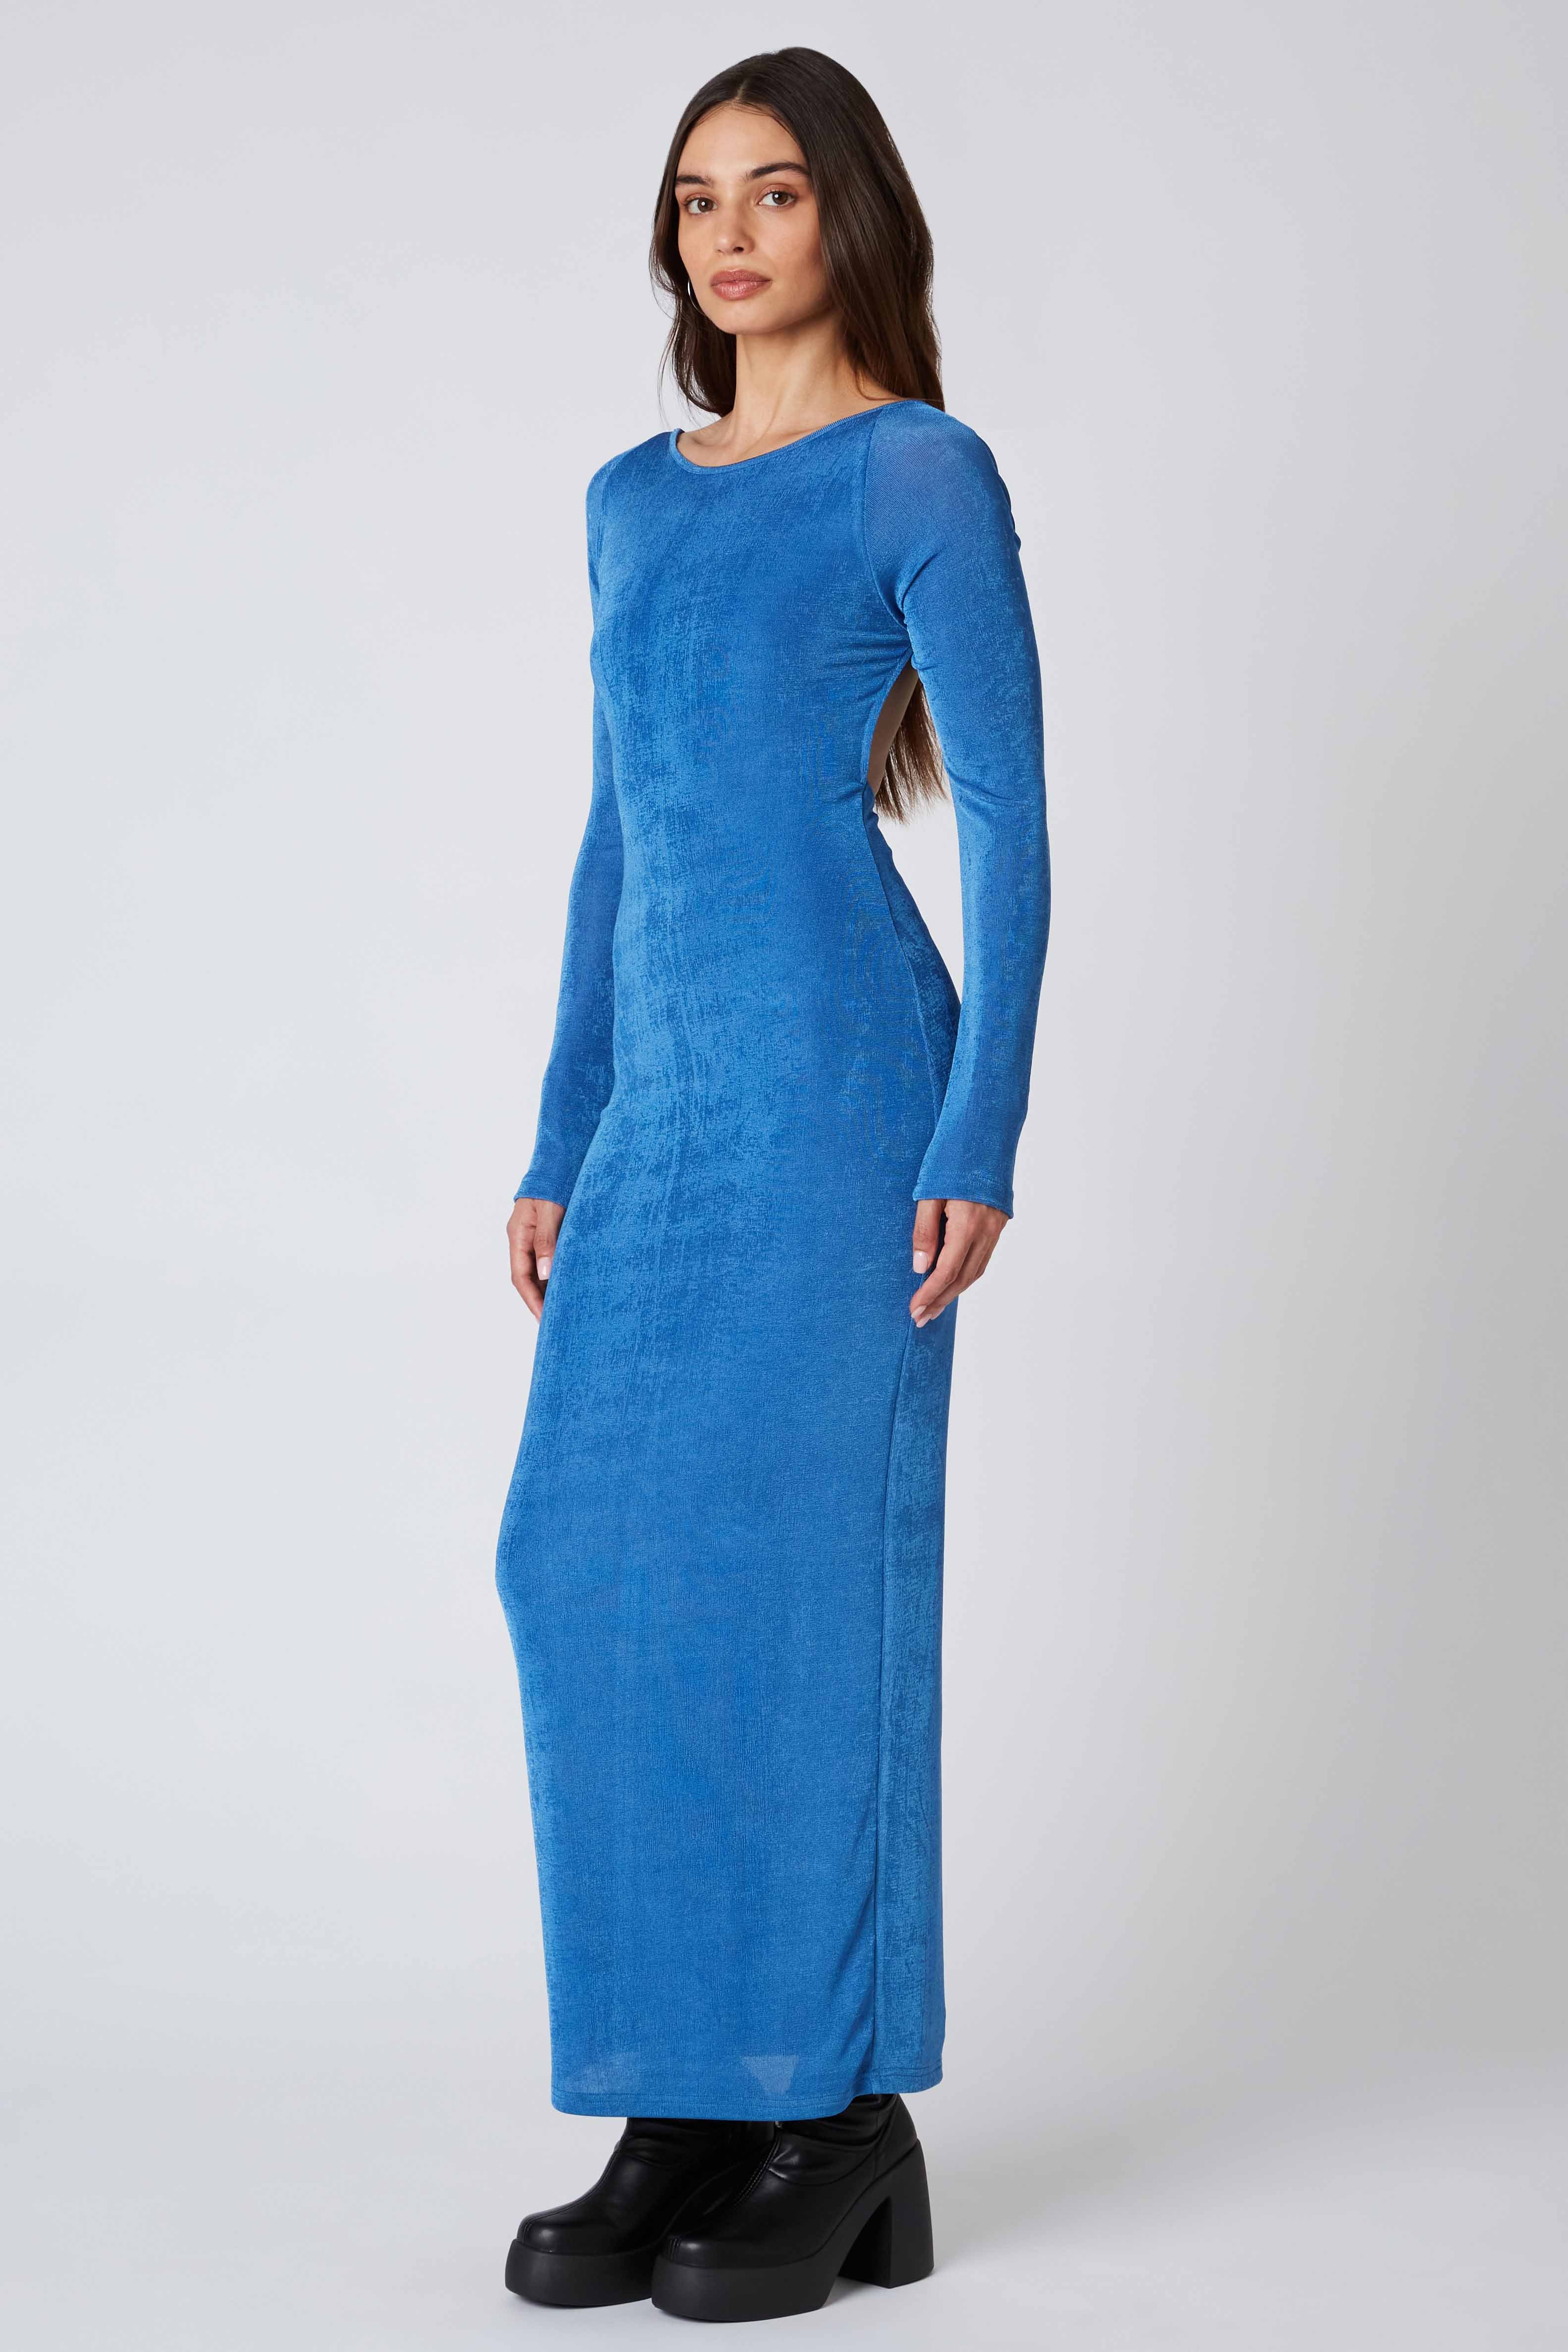 Long Sleeve Maxi Dress in Marine Blue Side View